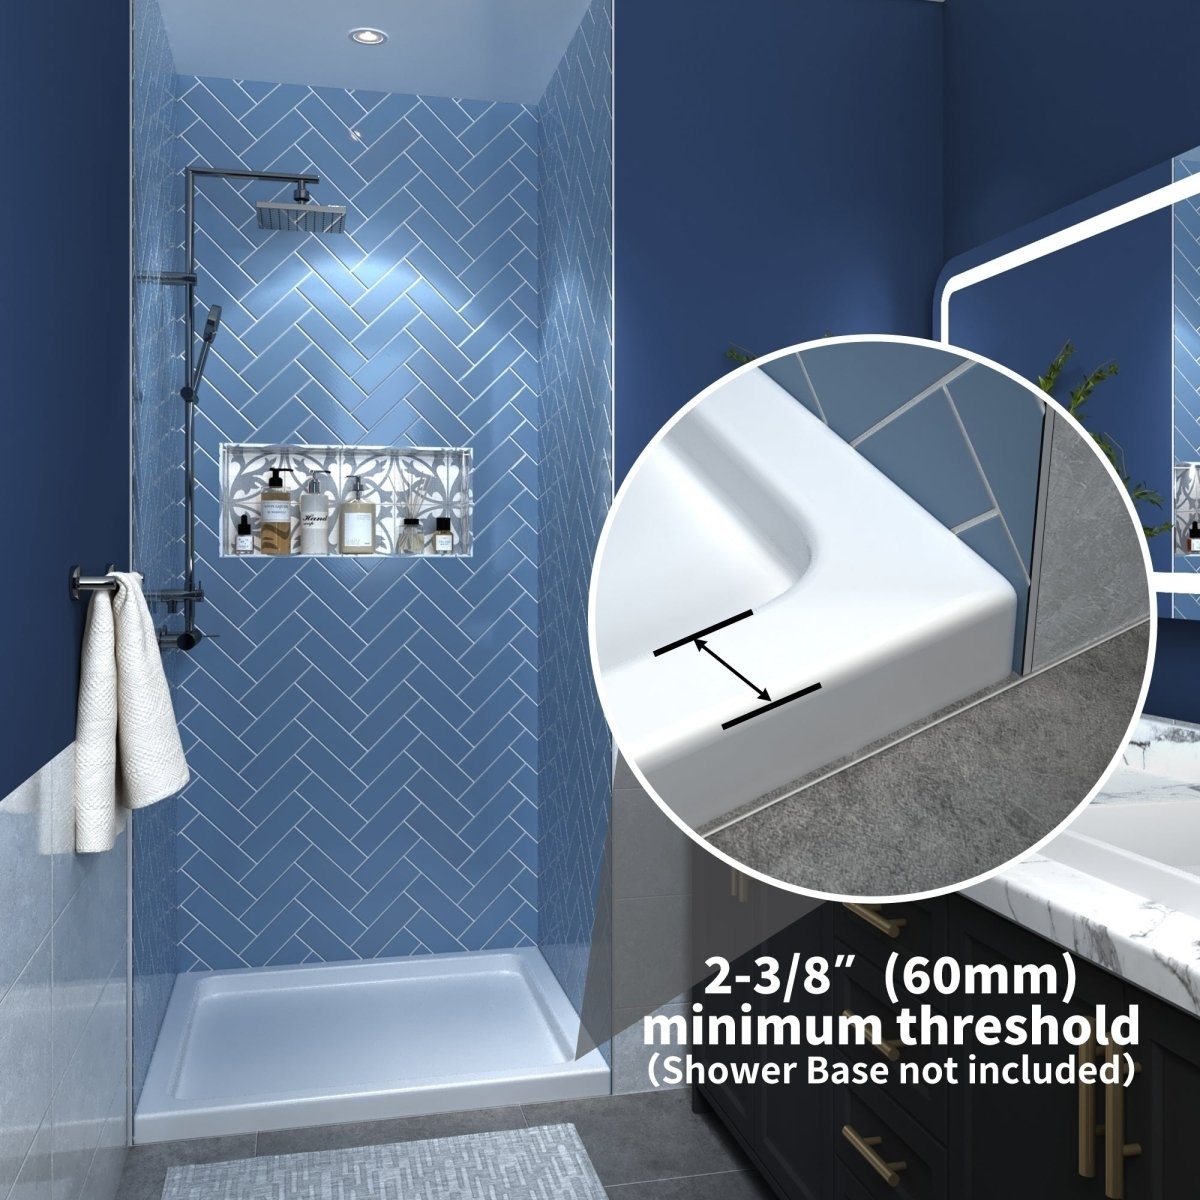 Classy 24-25 1.5 W X 72 H Small Shower Door Hinged Pivot Chrome Install Clear Glass Shower Door